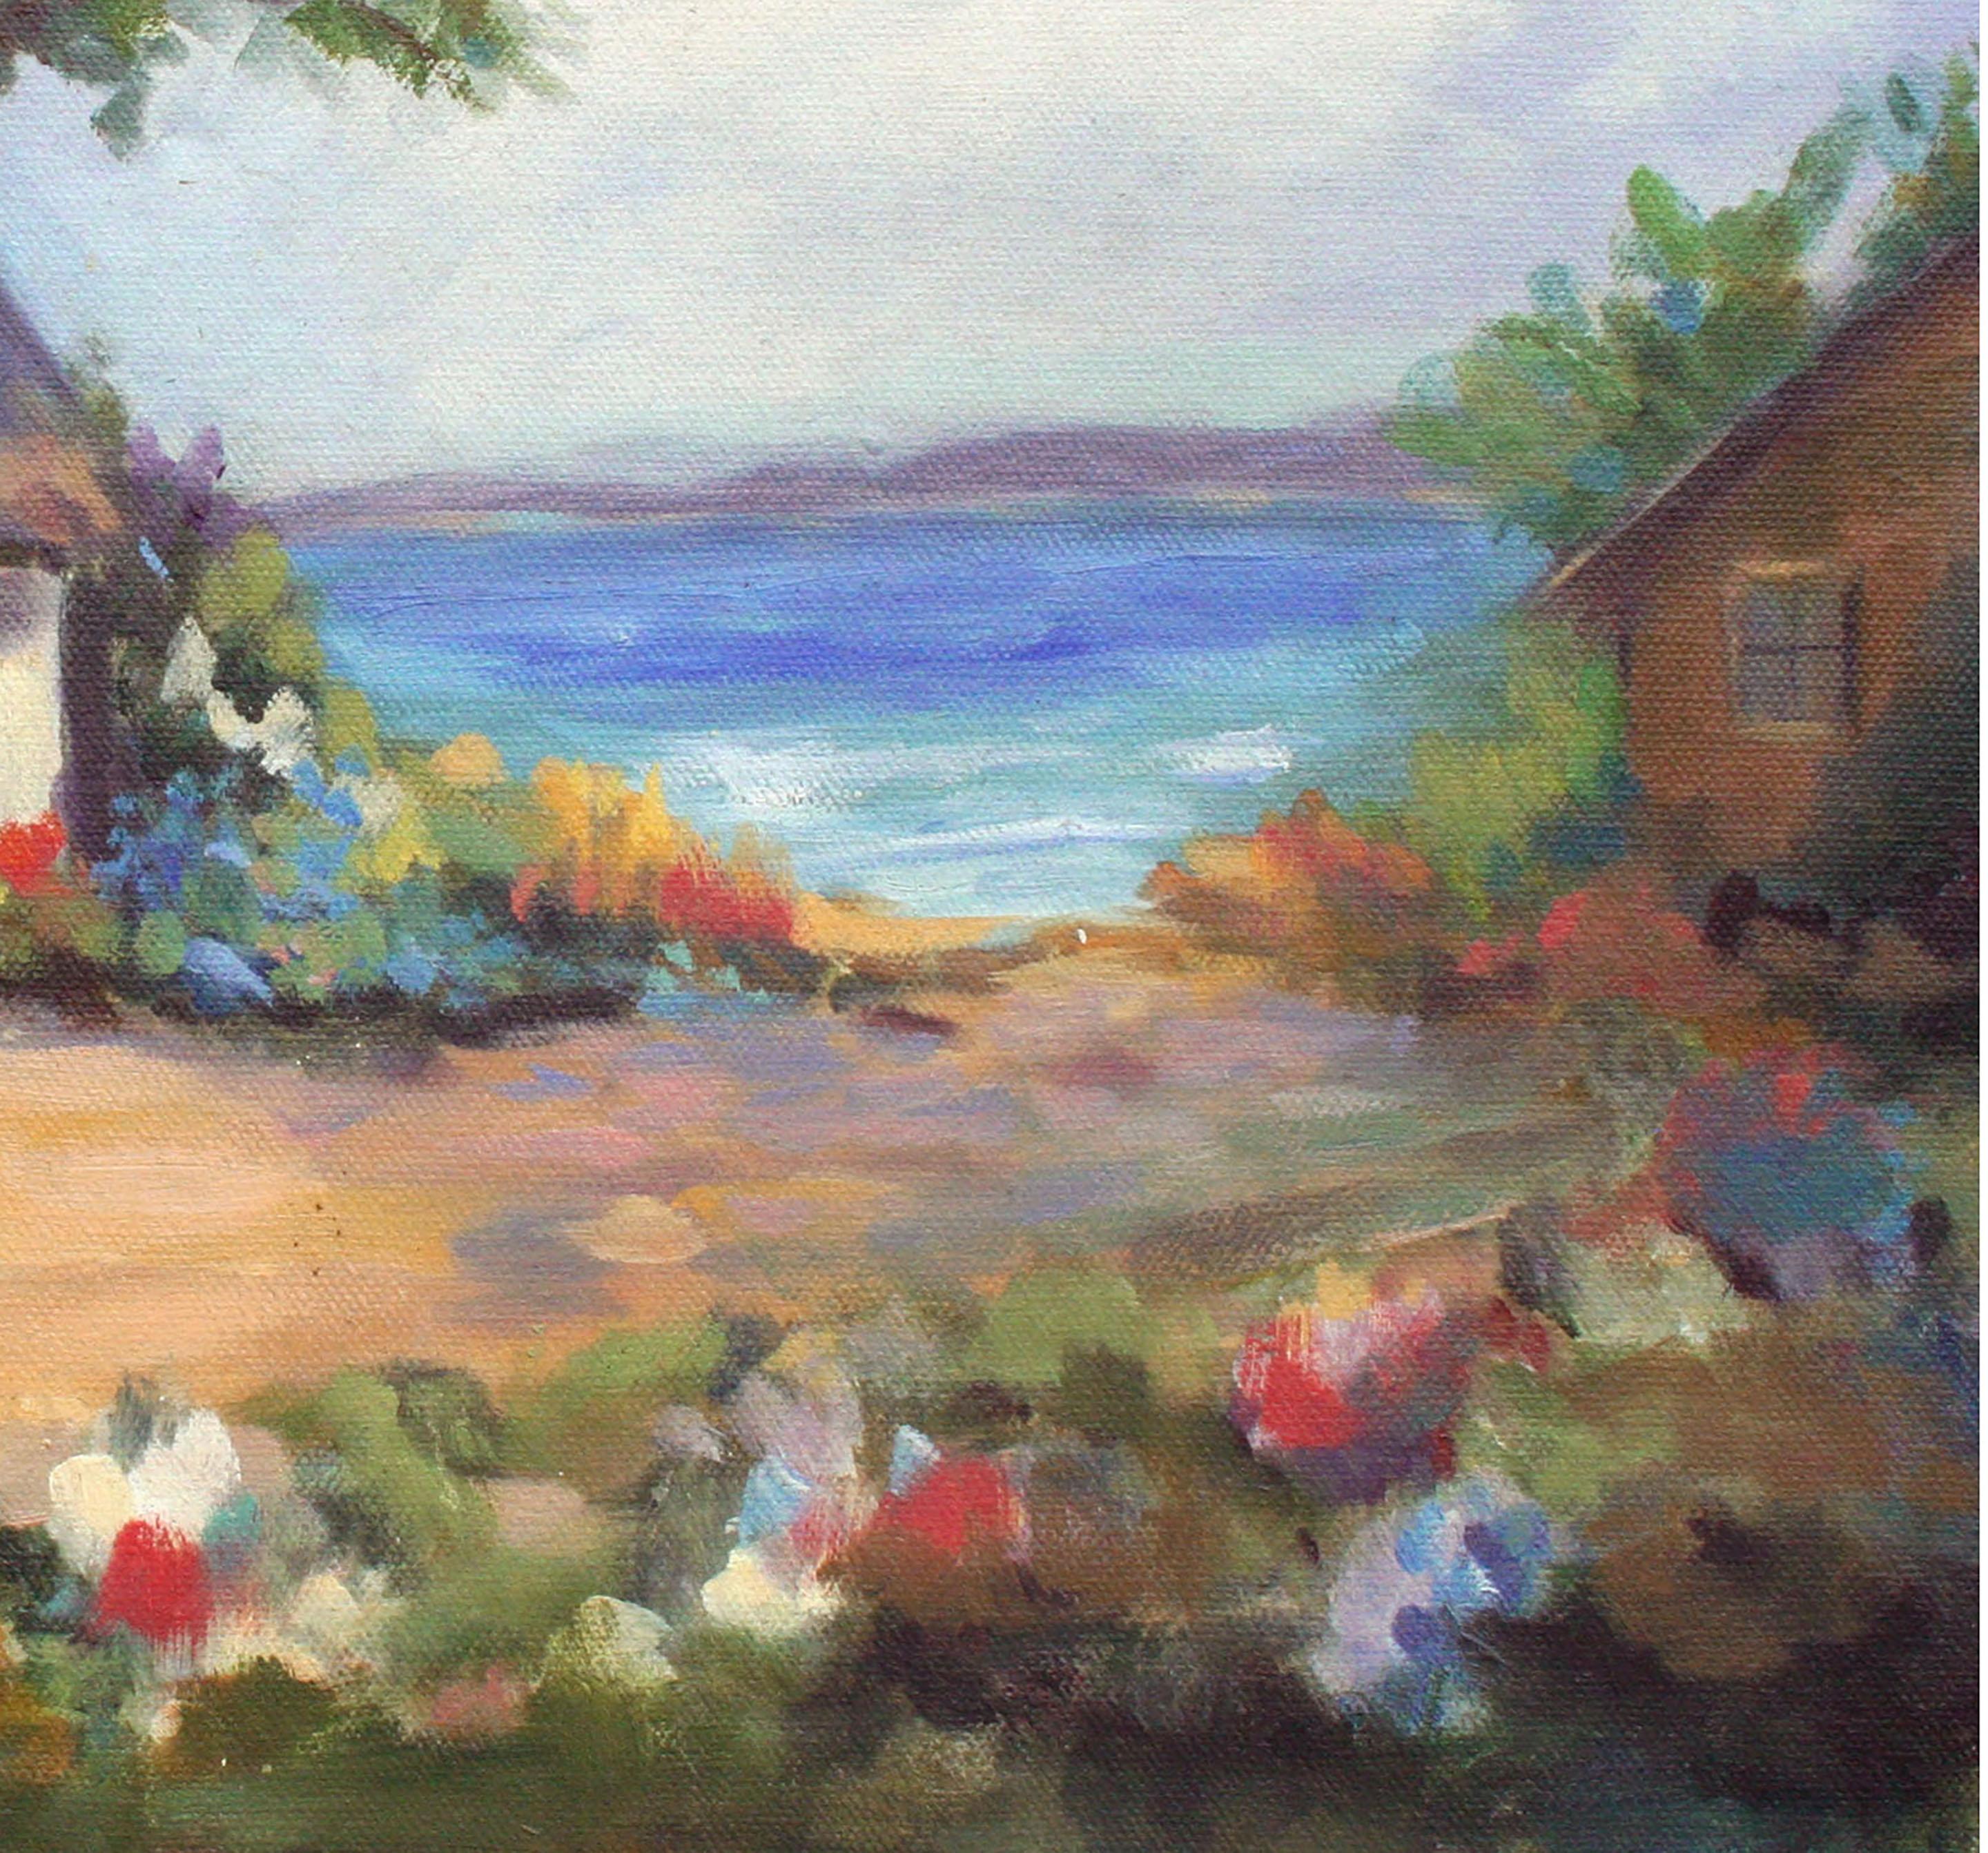 Pacific Grove Beach Cottage Garden Landscape - American Impressionist Painting by M. Lynch